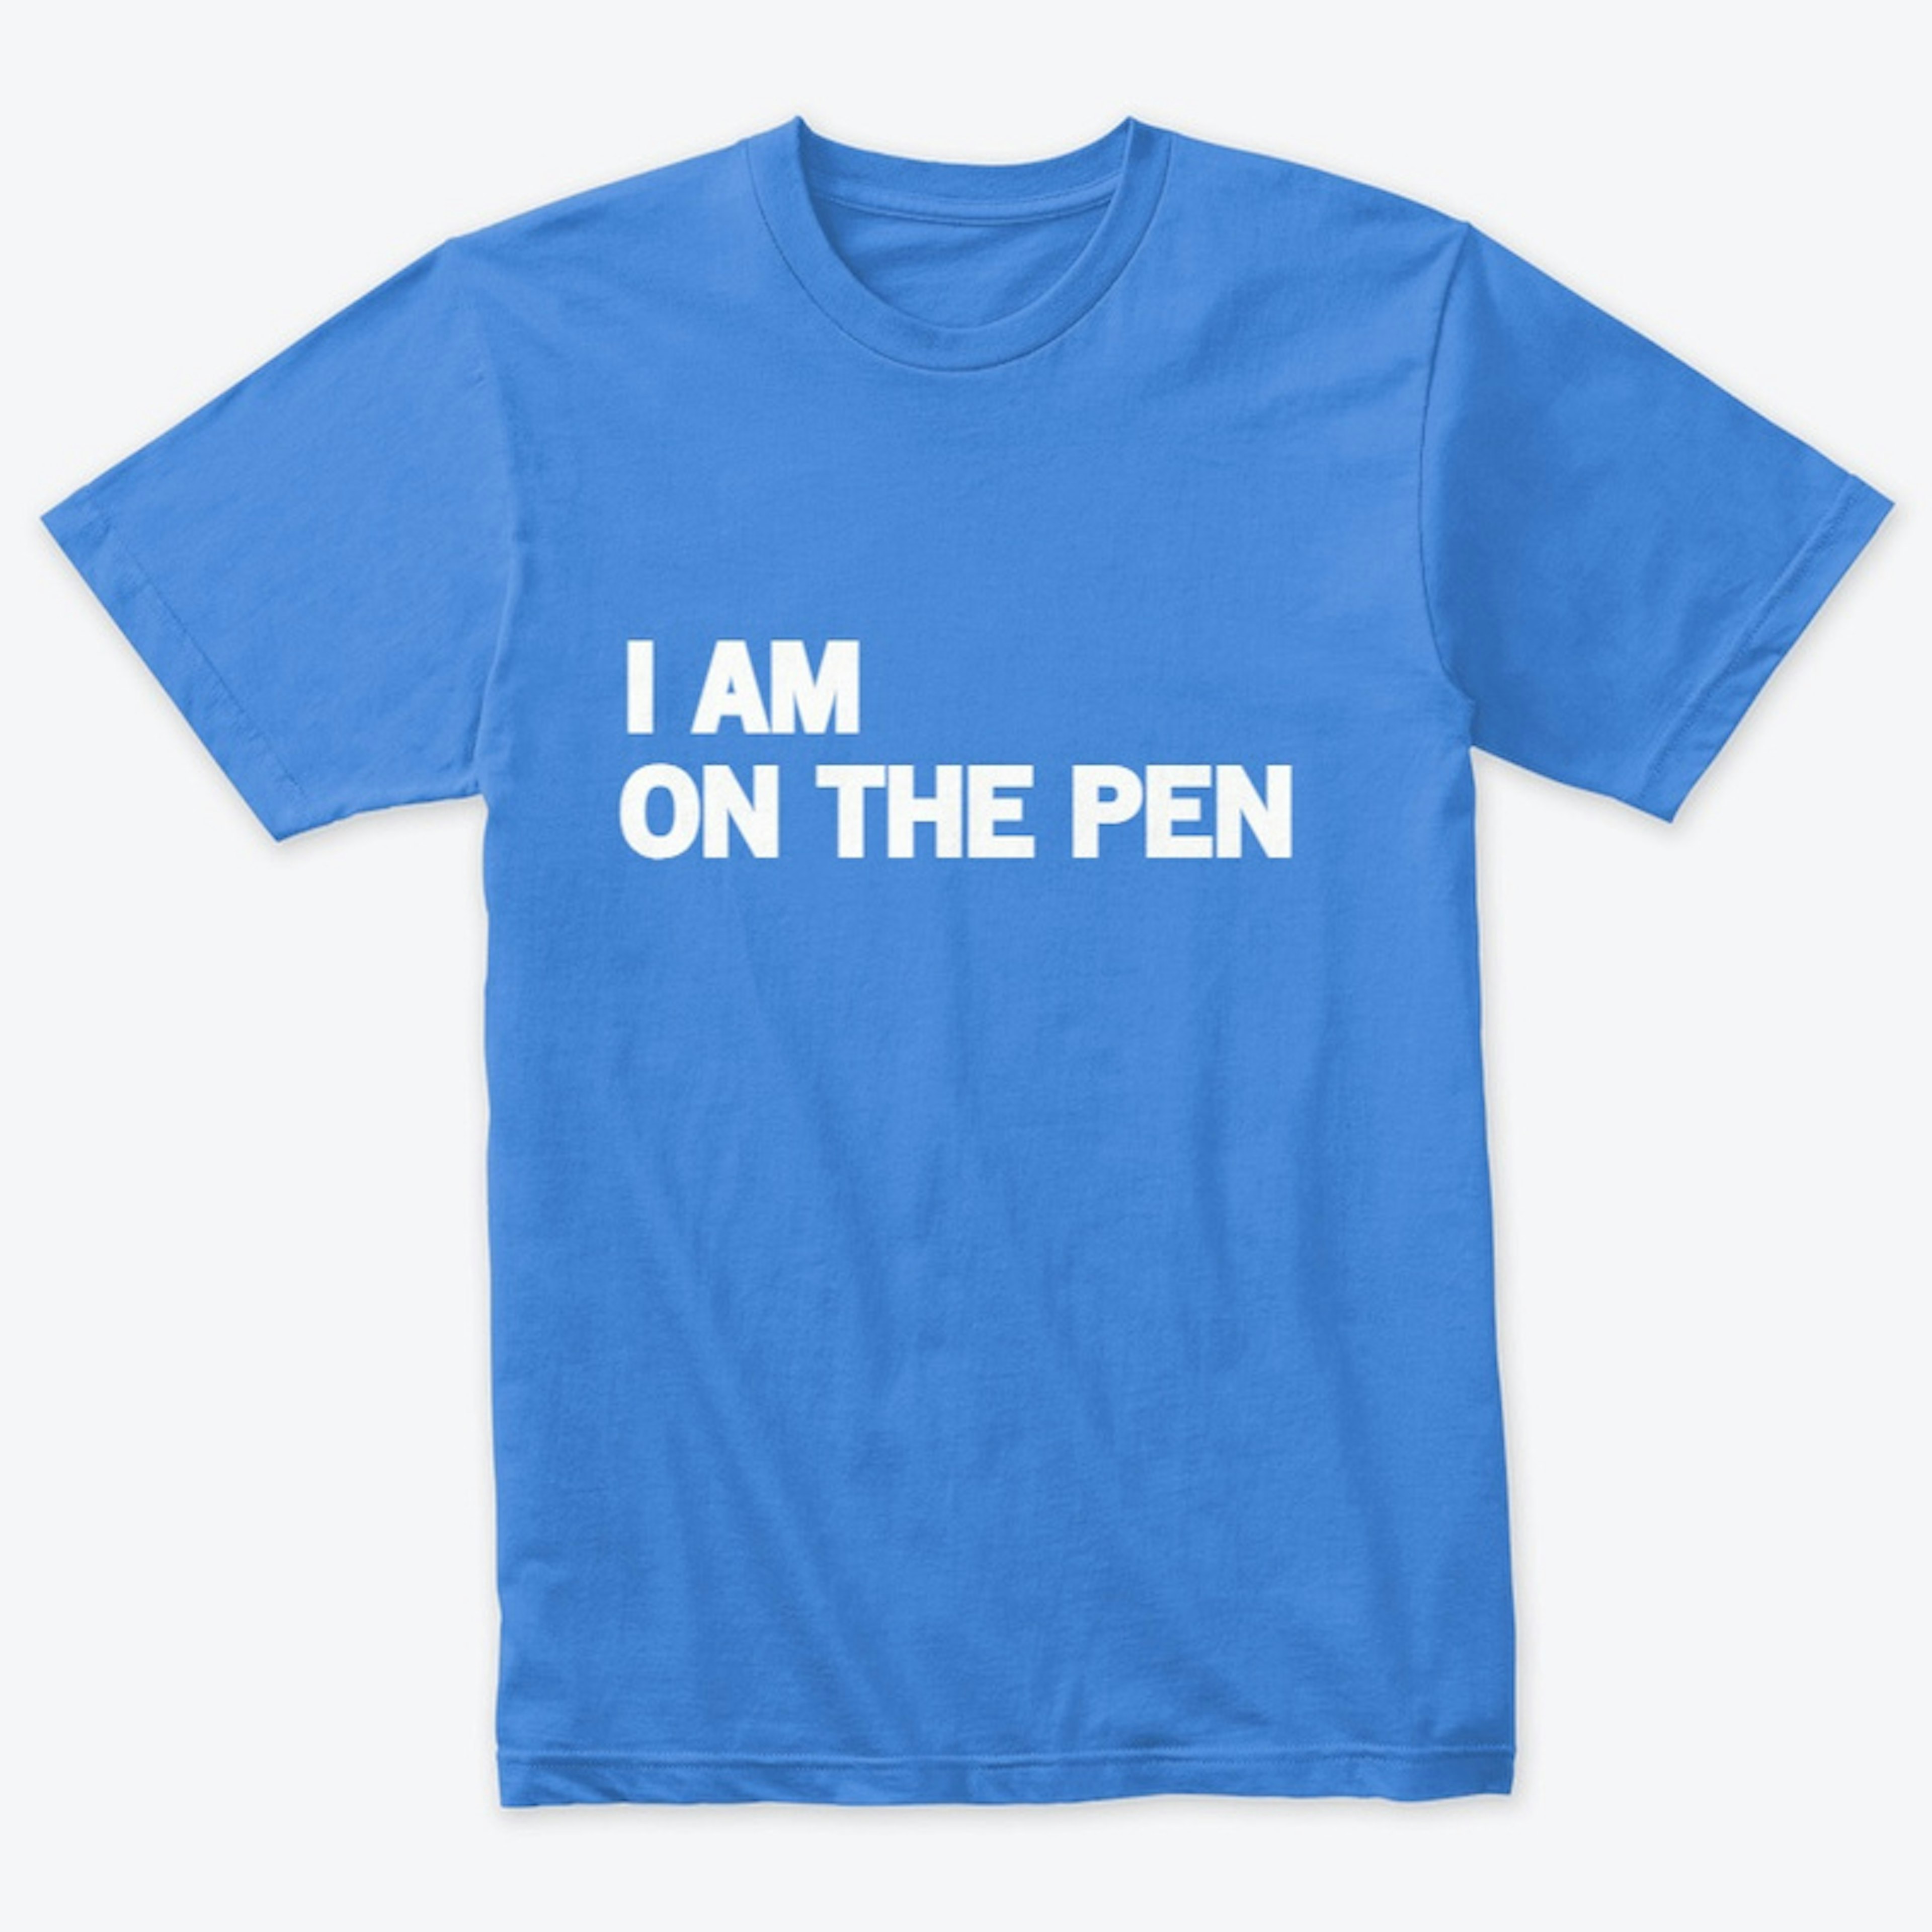 I AM ON THE PEN